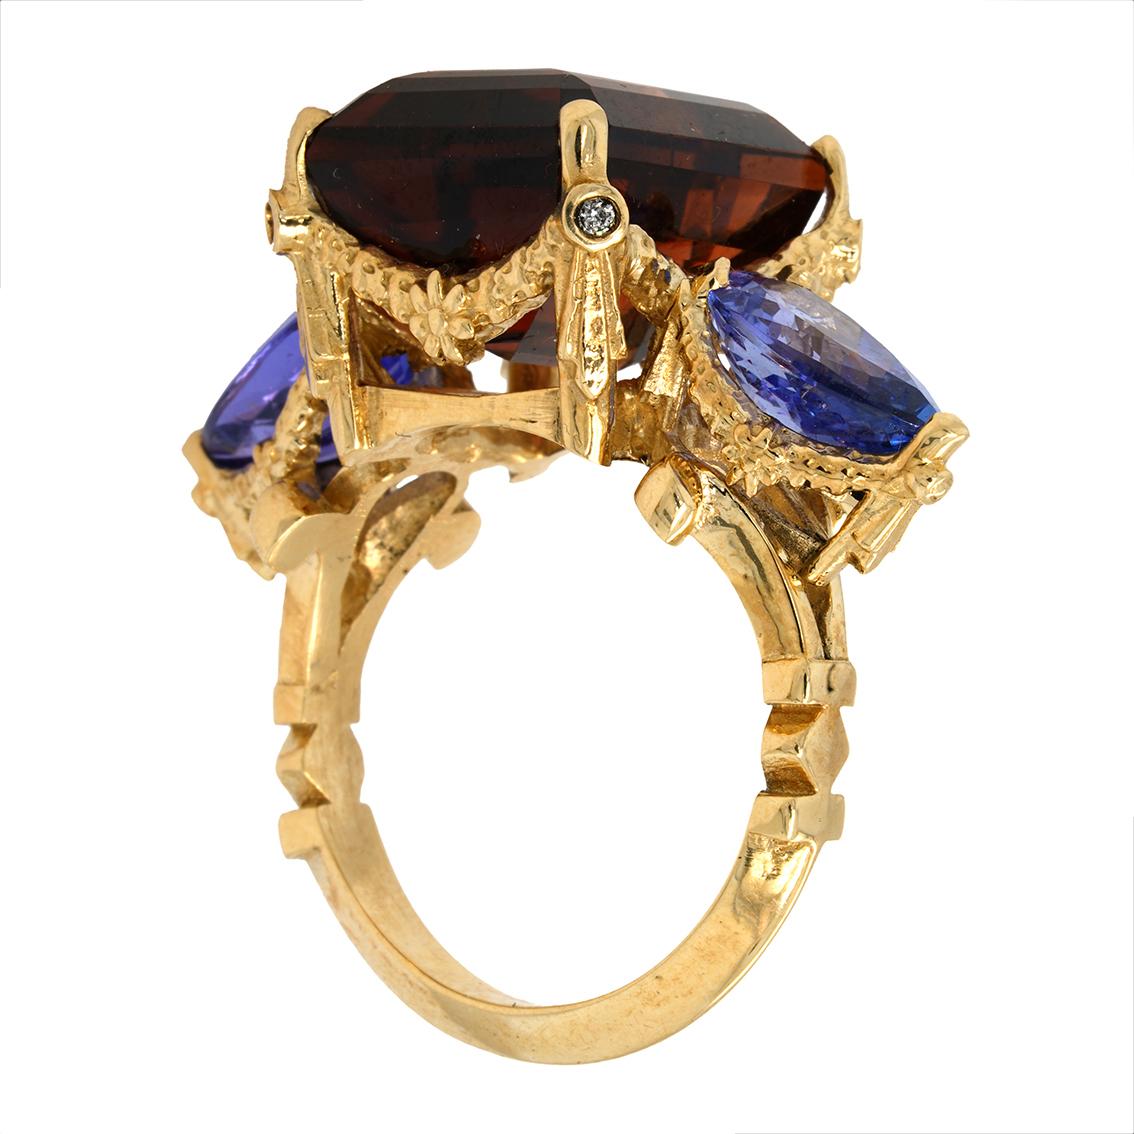 Exquisitely handcrafted in 9kt yellow gold this stunning ring features a decadent rich cognac colored emerald cut tourmaline aloft a signature William Llewellyn Griffiths garland setting studded with four 1.4mm round brilliant cut white (E/F,VVs)